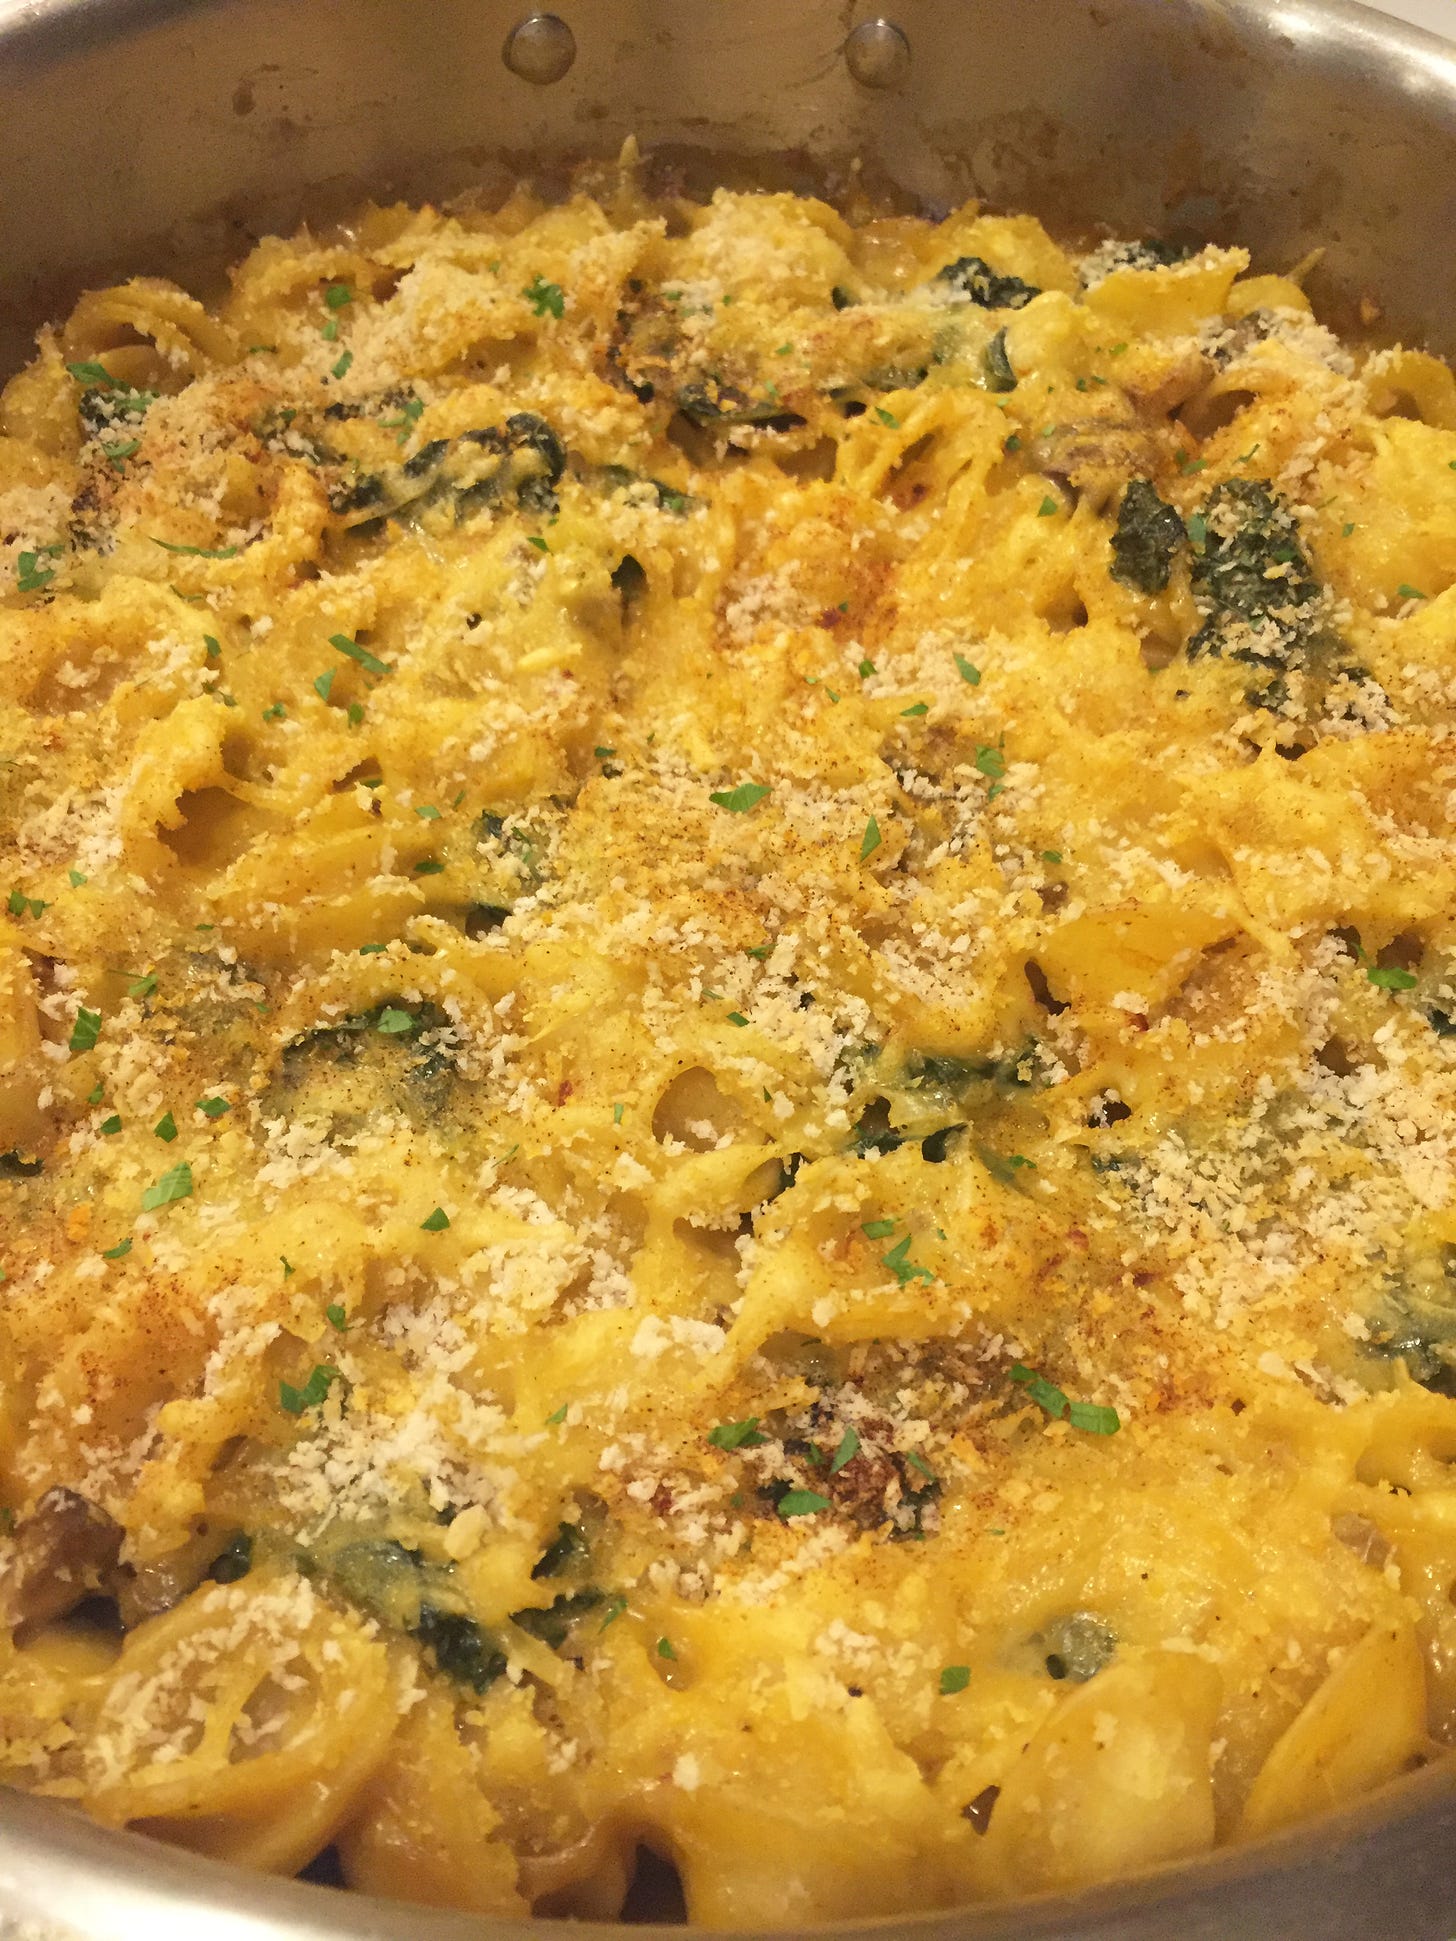 a pan full of creamy, yellow-orange baked mac & cheeze. The top is lightly covered with panko crumbs and paprika, and pieces of kale are visible throughout.